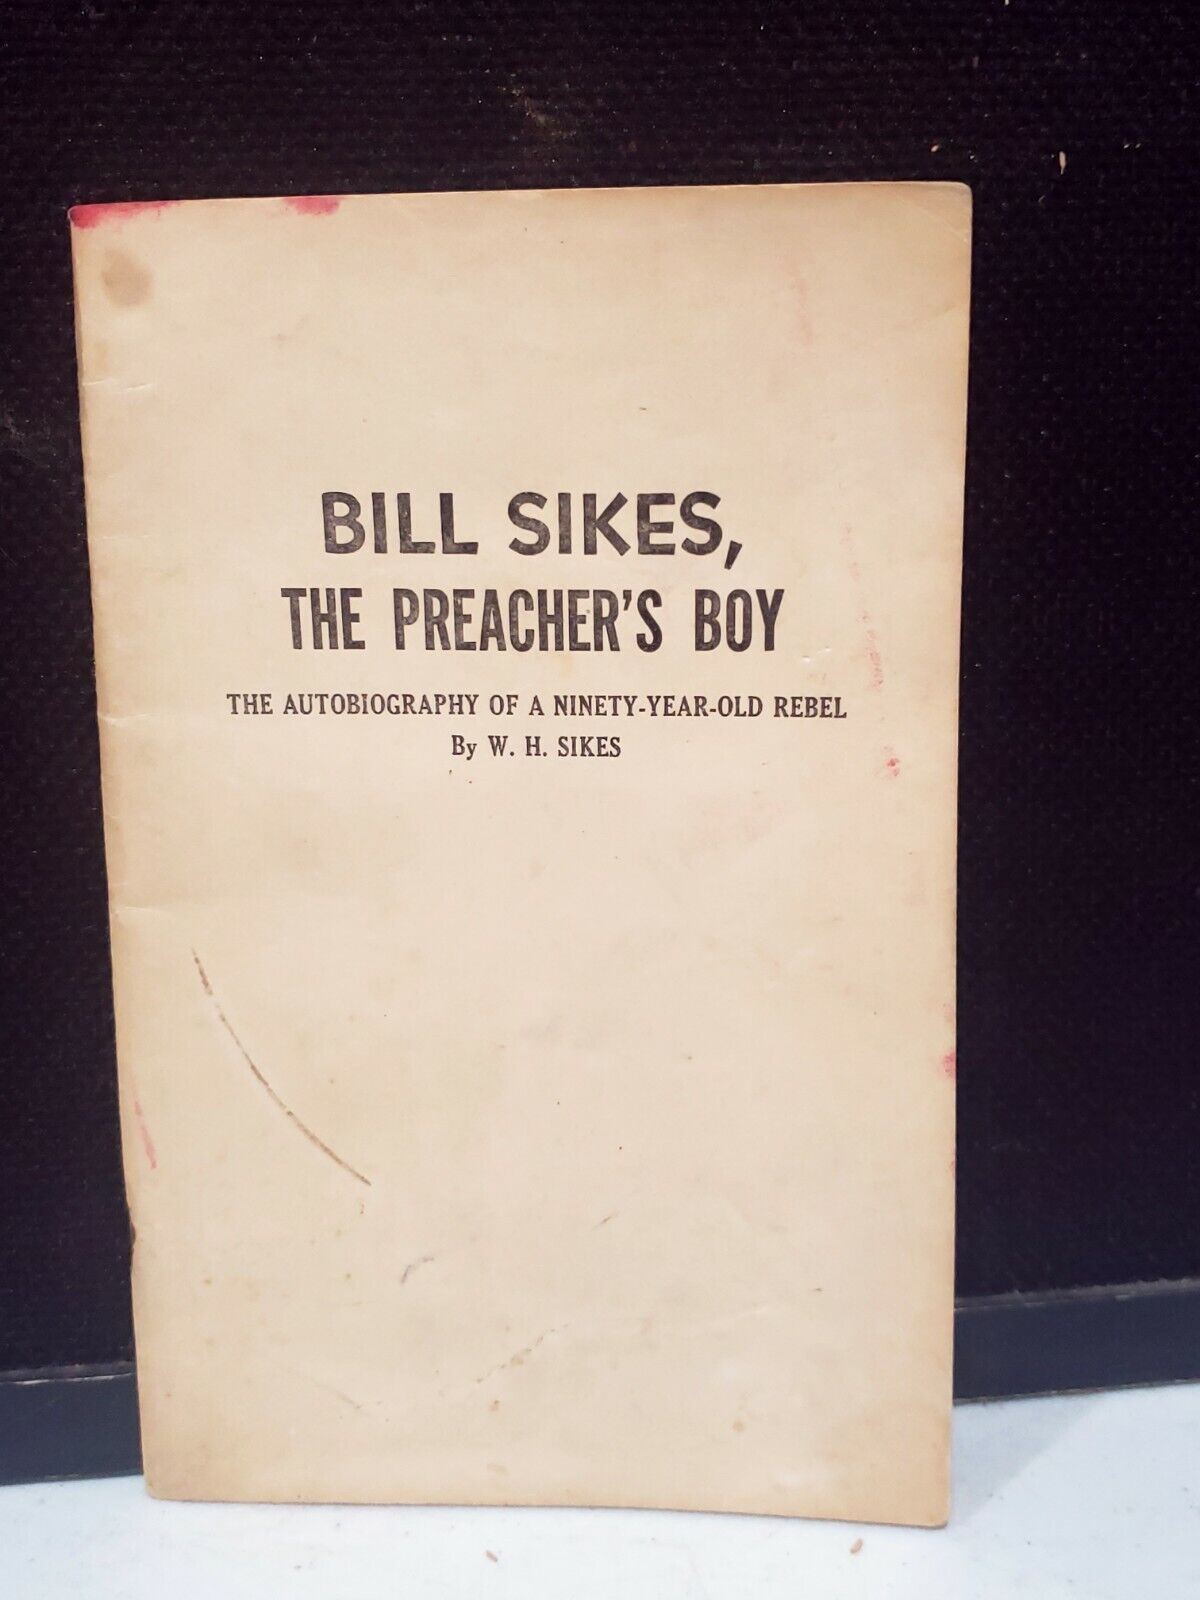 1948 BILL SIKES AUTOBIOGRAPHY THE PREACHER\'S BOY BY W.H. SIKES 1ST EDITION BOOK